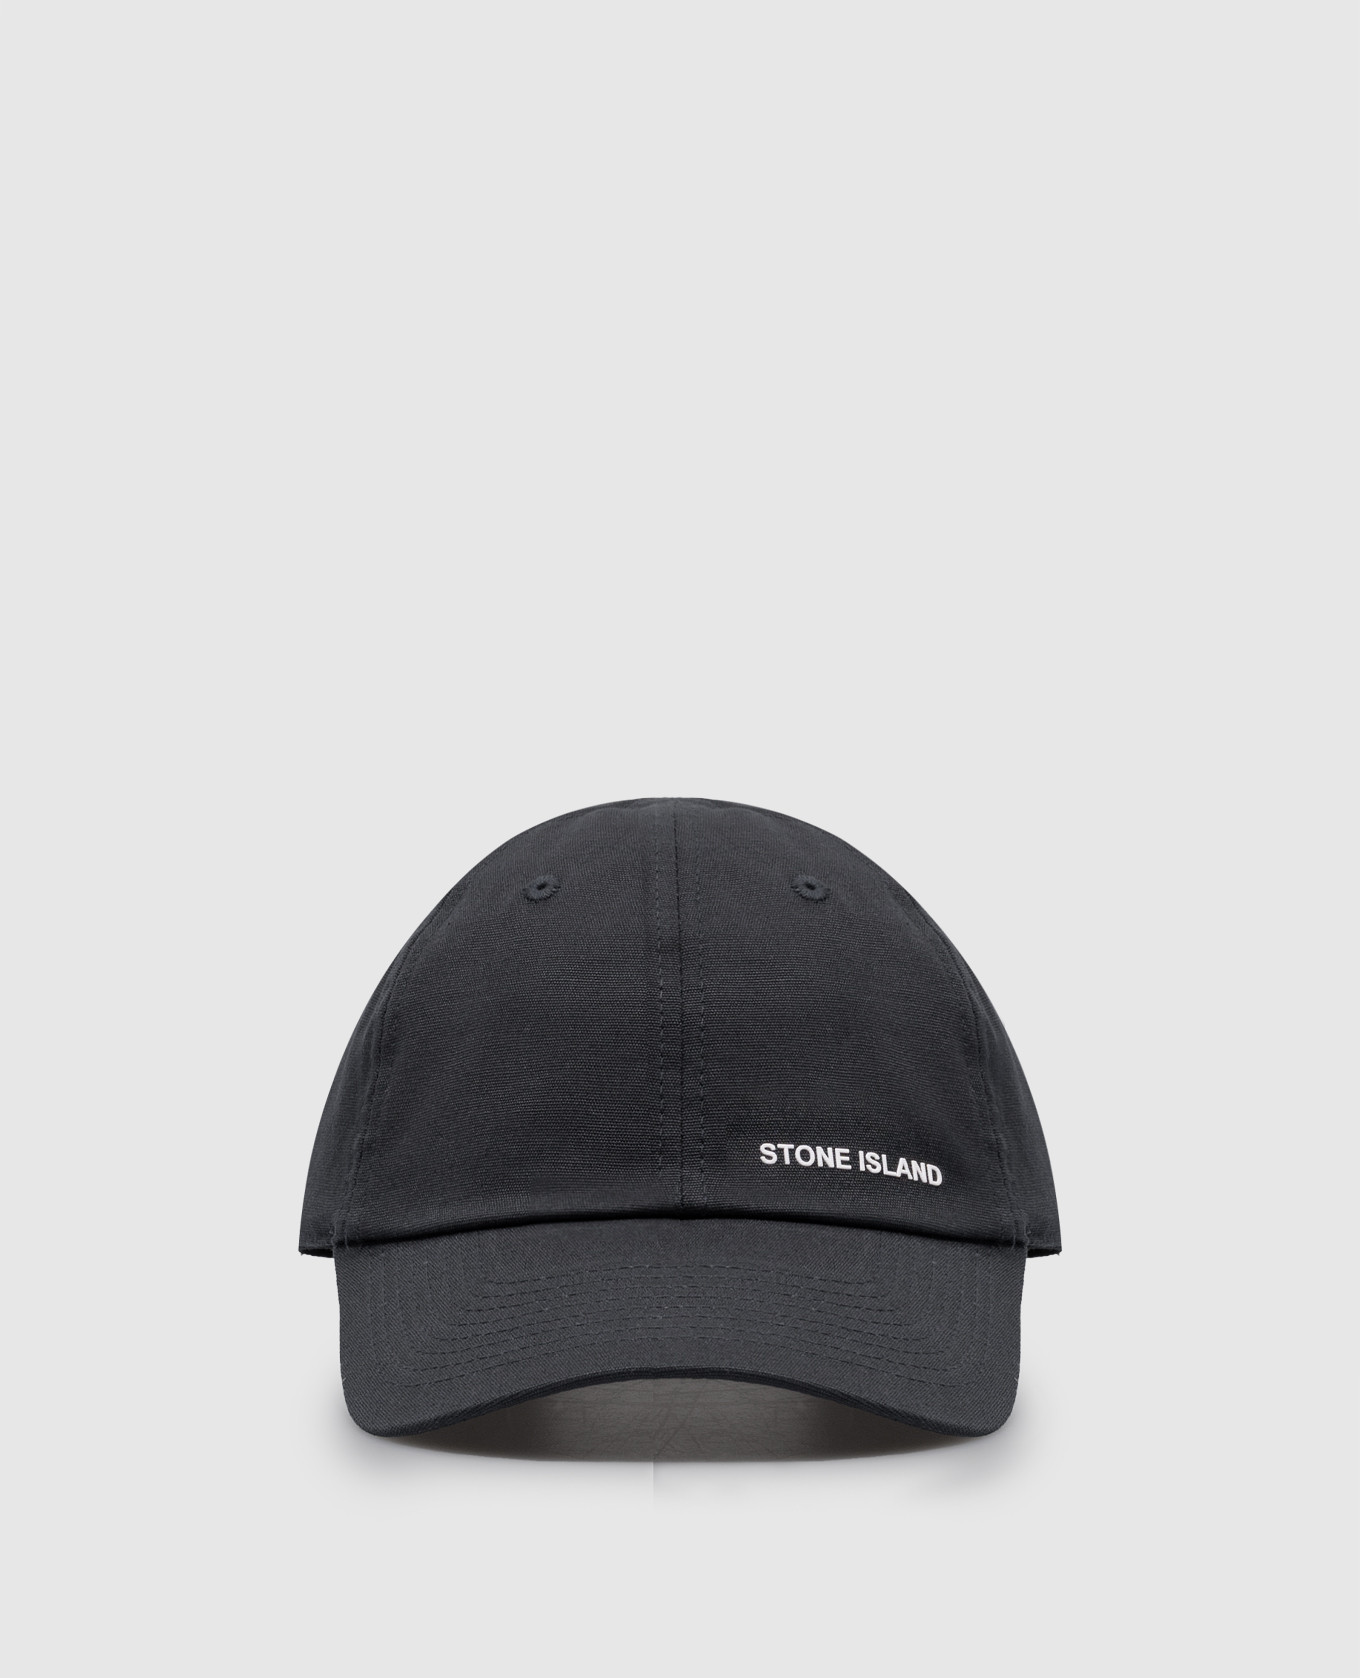 Black cap with contrasting textured logo print